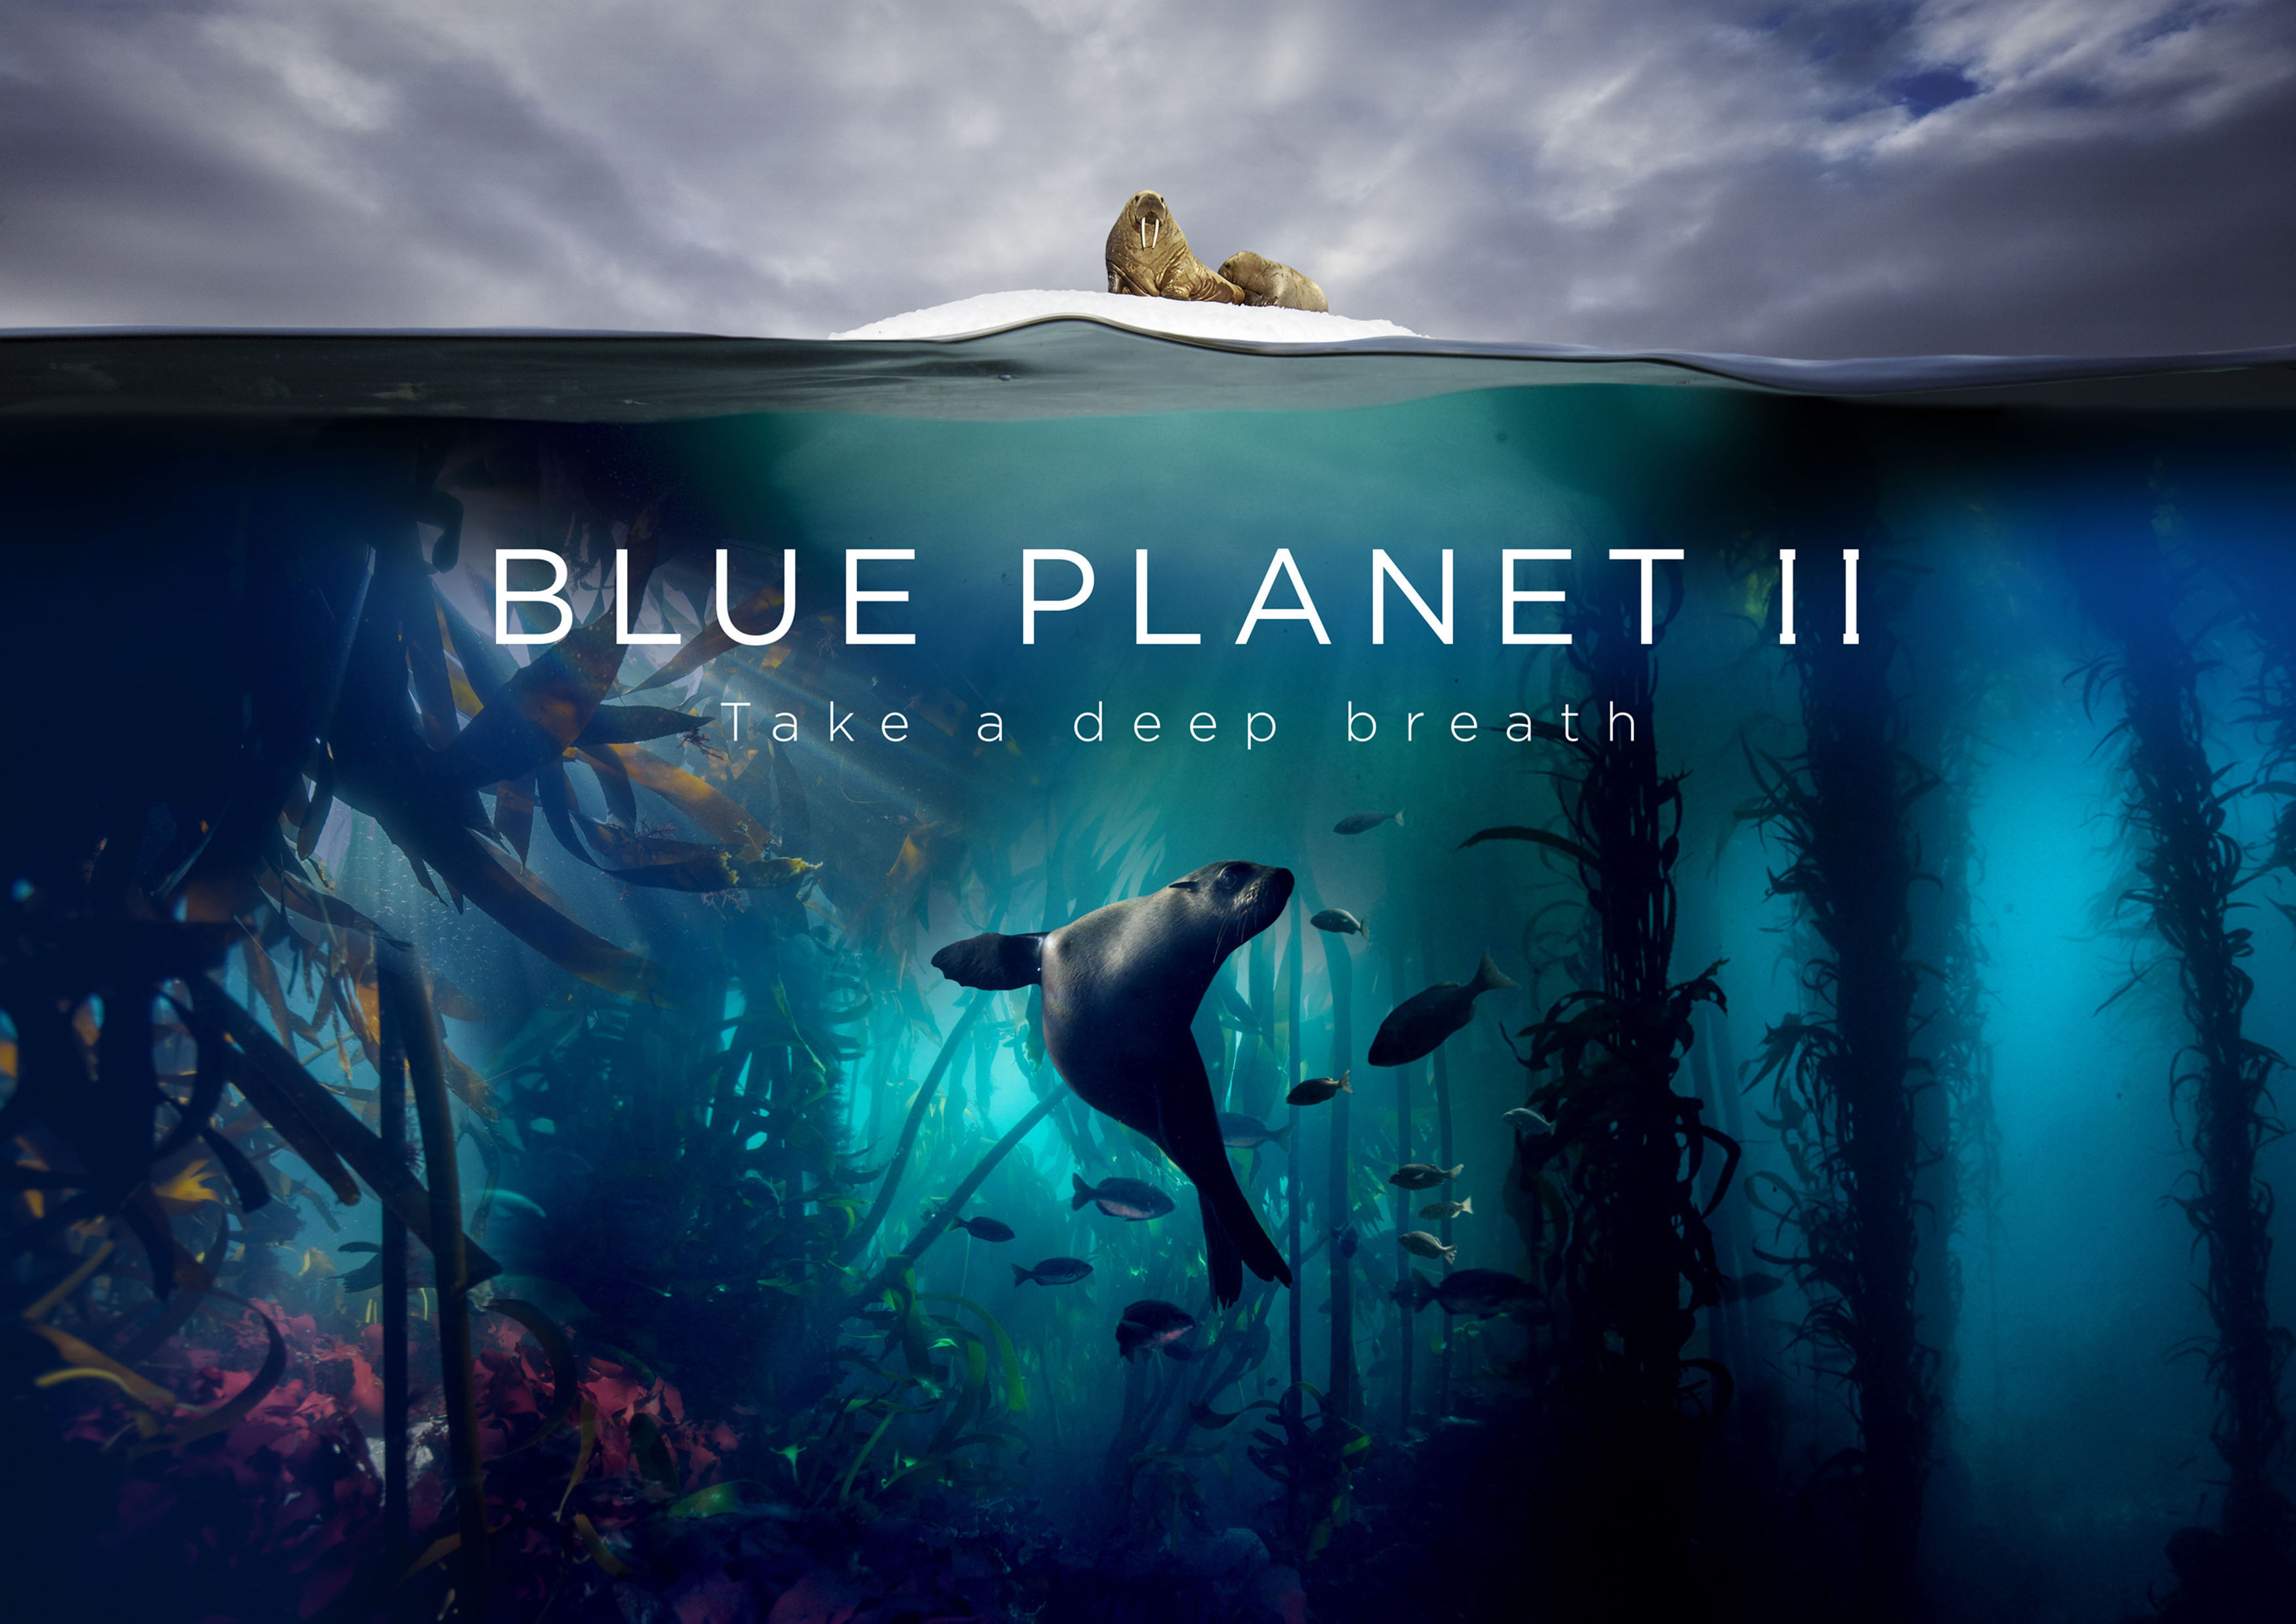 Blue Planet II is currently on air (BBC)